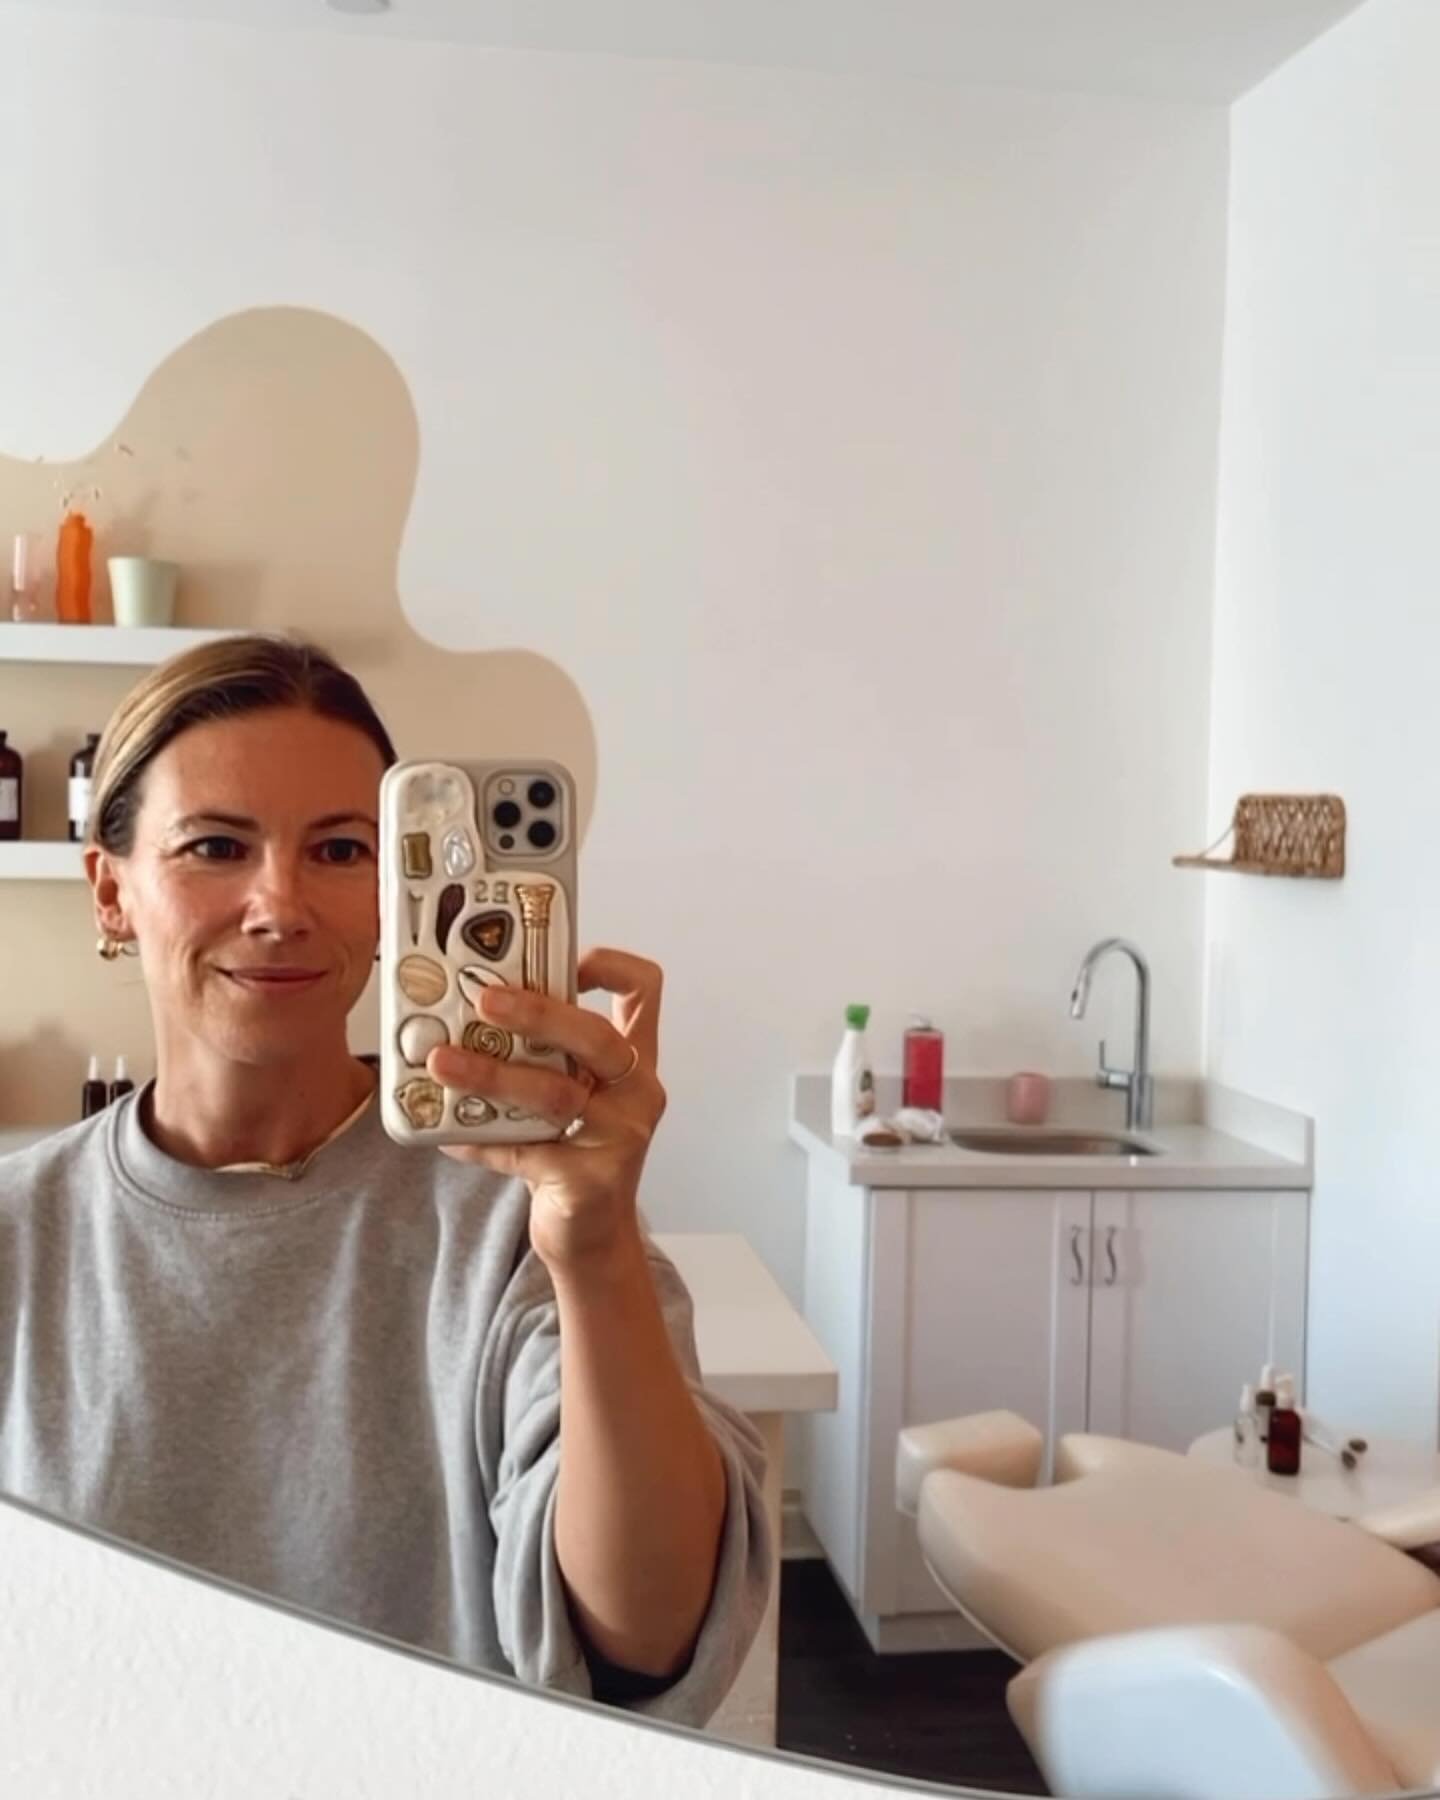 Our SKINCARE prep is here! My amazing facial therapist @face__place shared her secrets with us to get THE BEST skin in time for your wedding. You will be surprised and also excited to see how simple it can be 😀

Comment &ldquo; skin &ldquo; below an